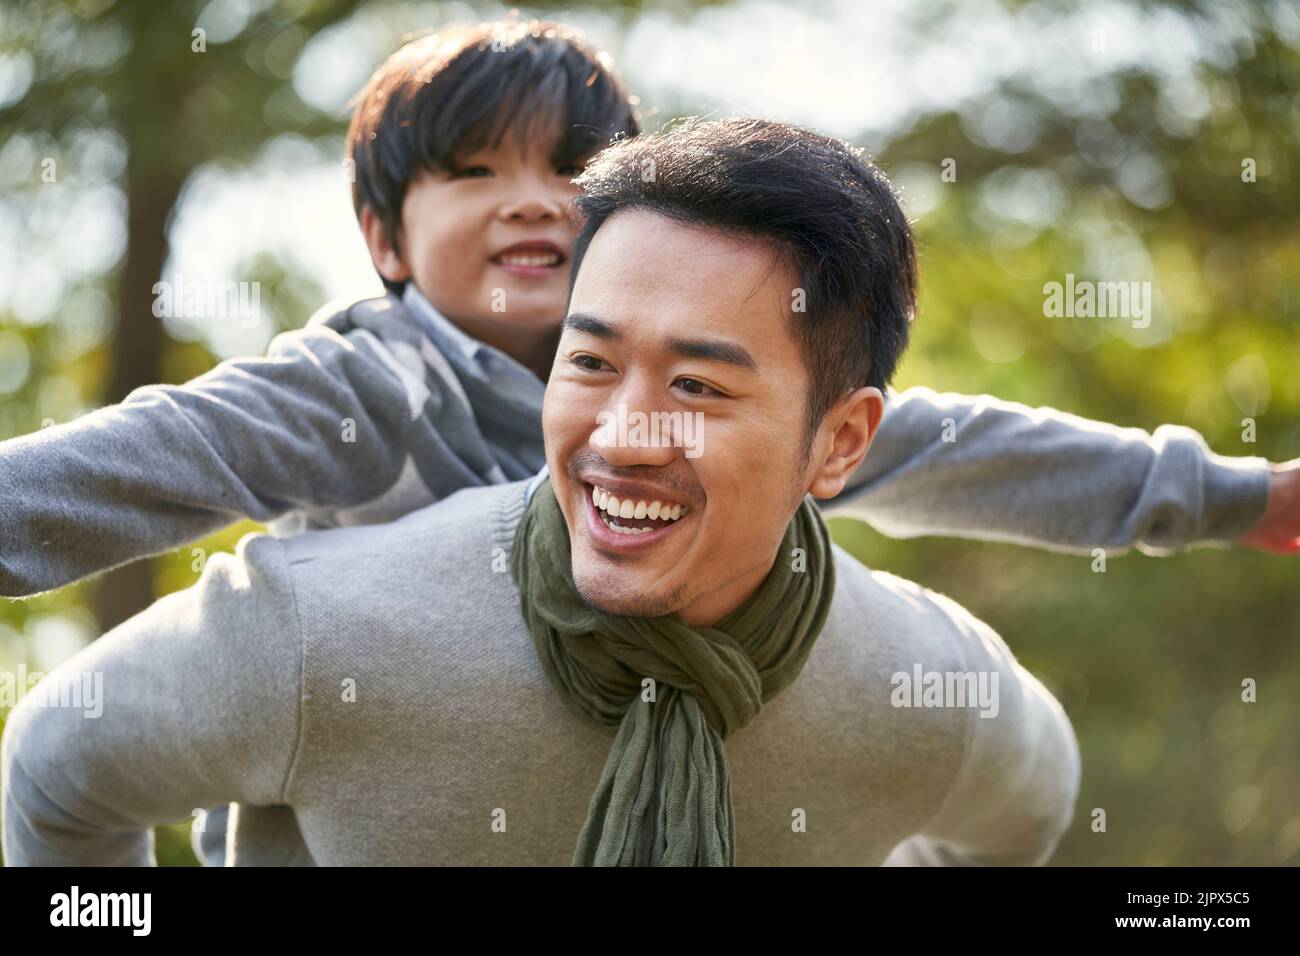 young asian father carrying son on back having fun enjoying nature outdoors in park Stock Photo